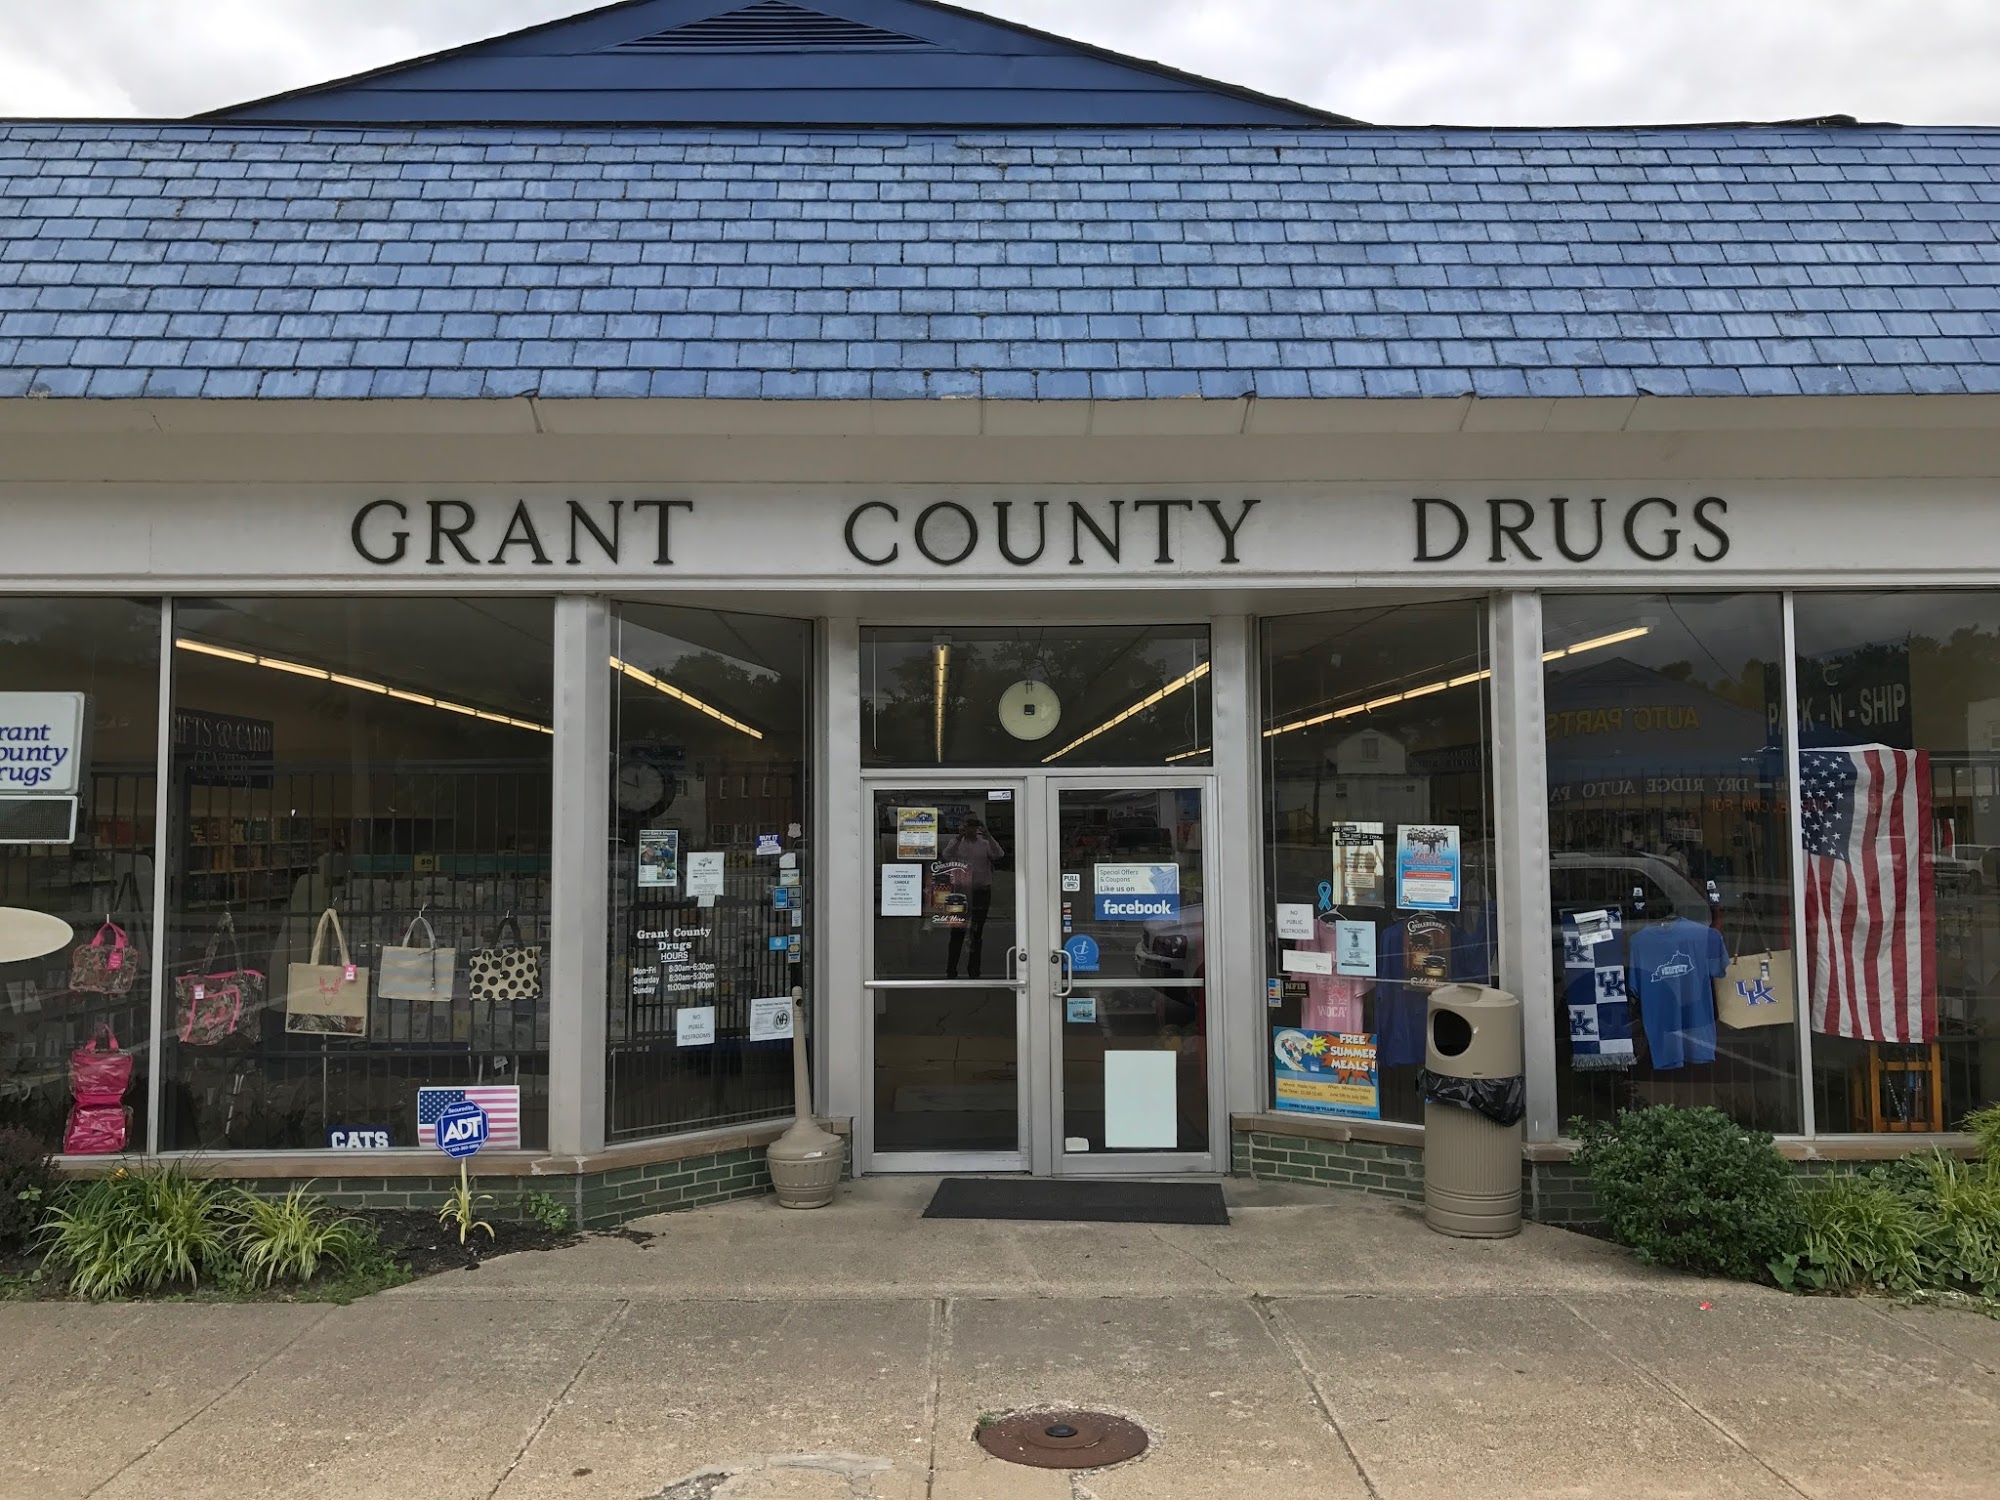 Grant County Drugs